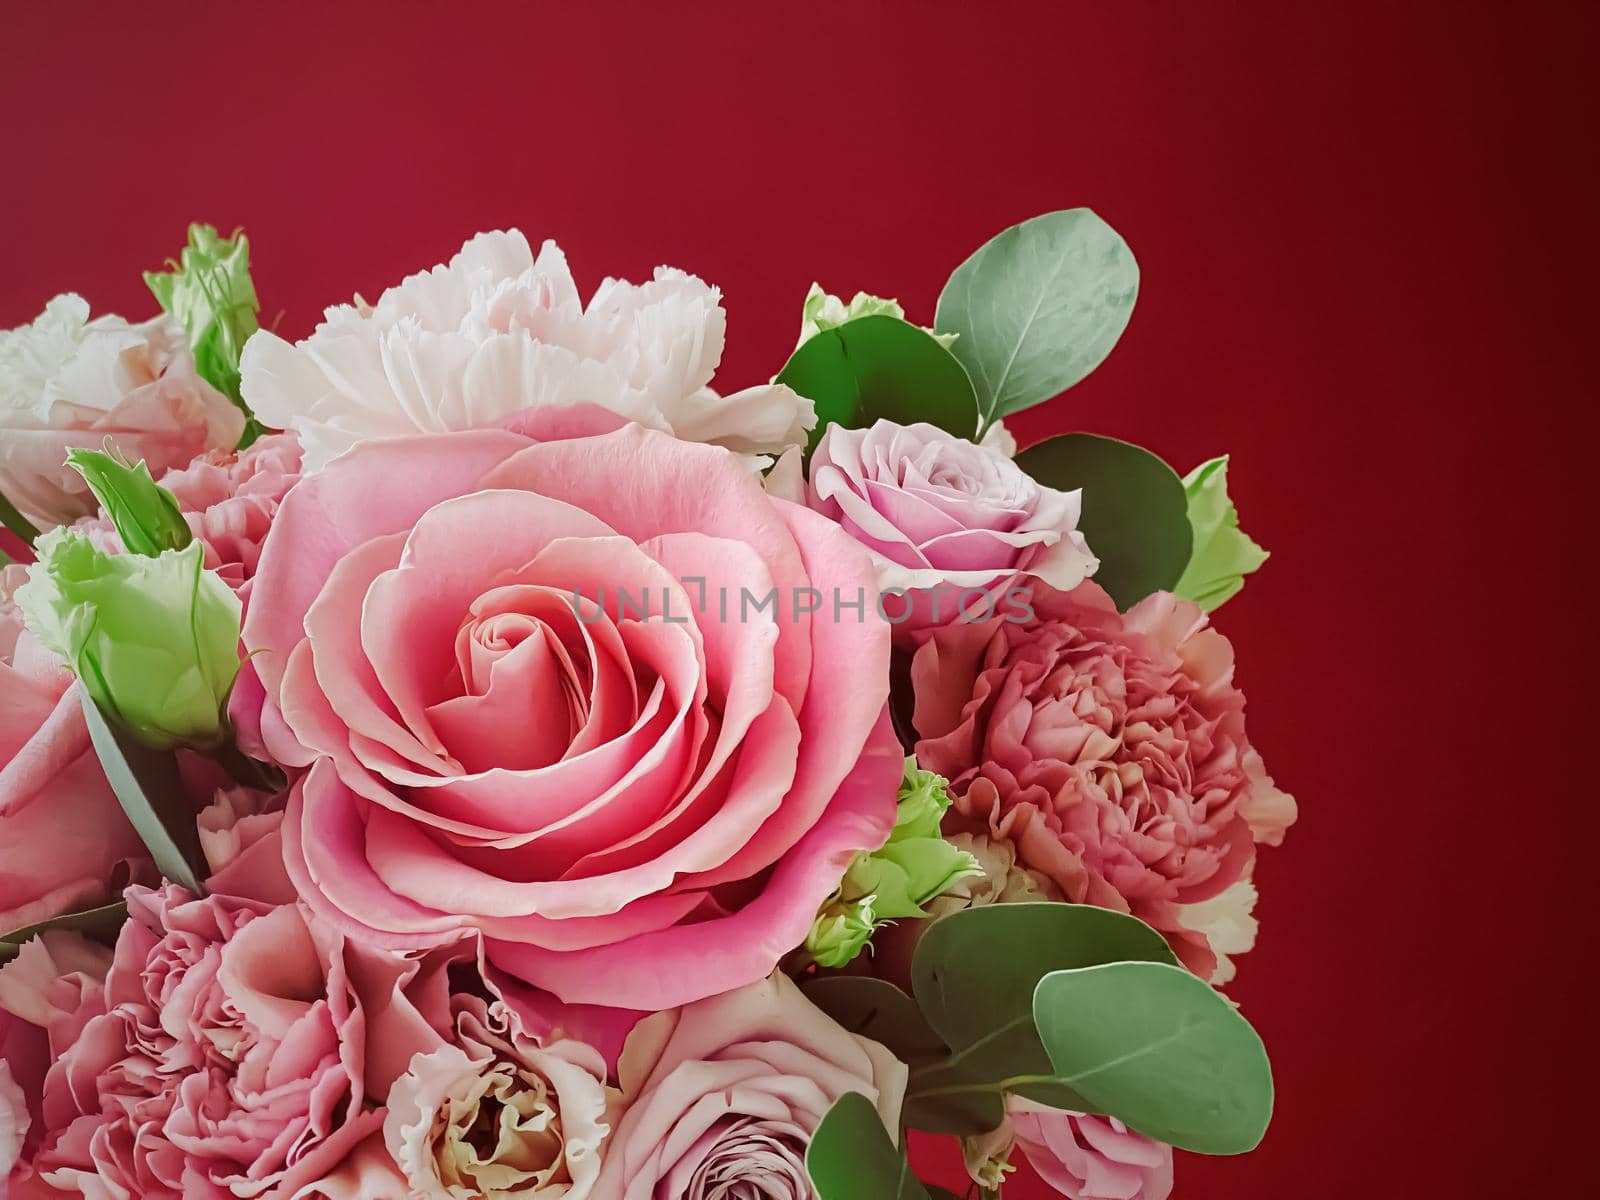 Beautiful flower box on red background, bouquet of blooming flowers as holiday gift, luxury floral design concept